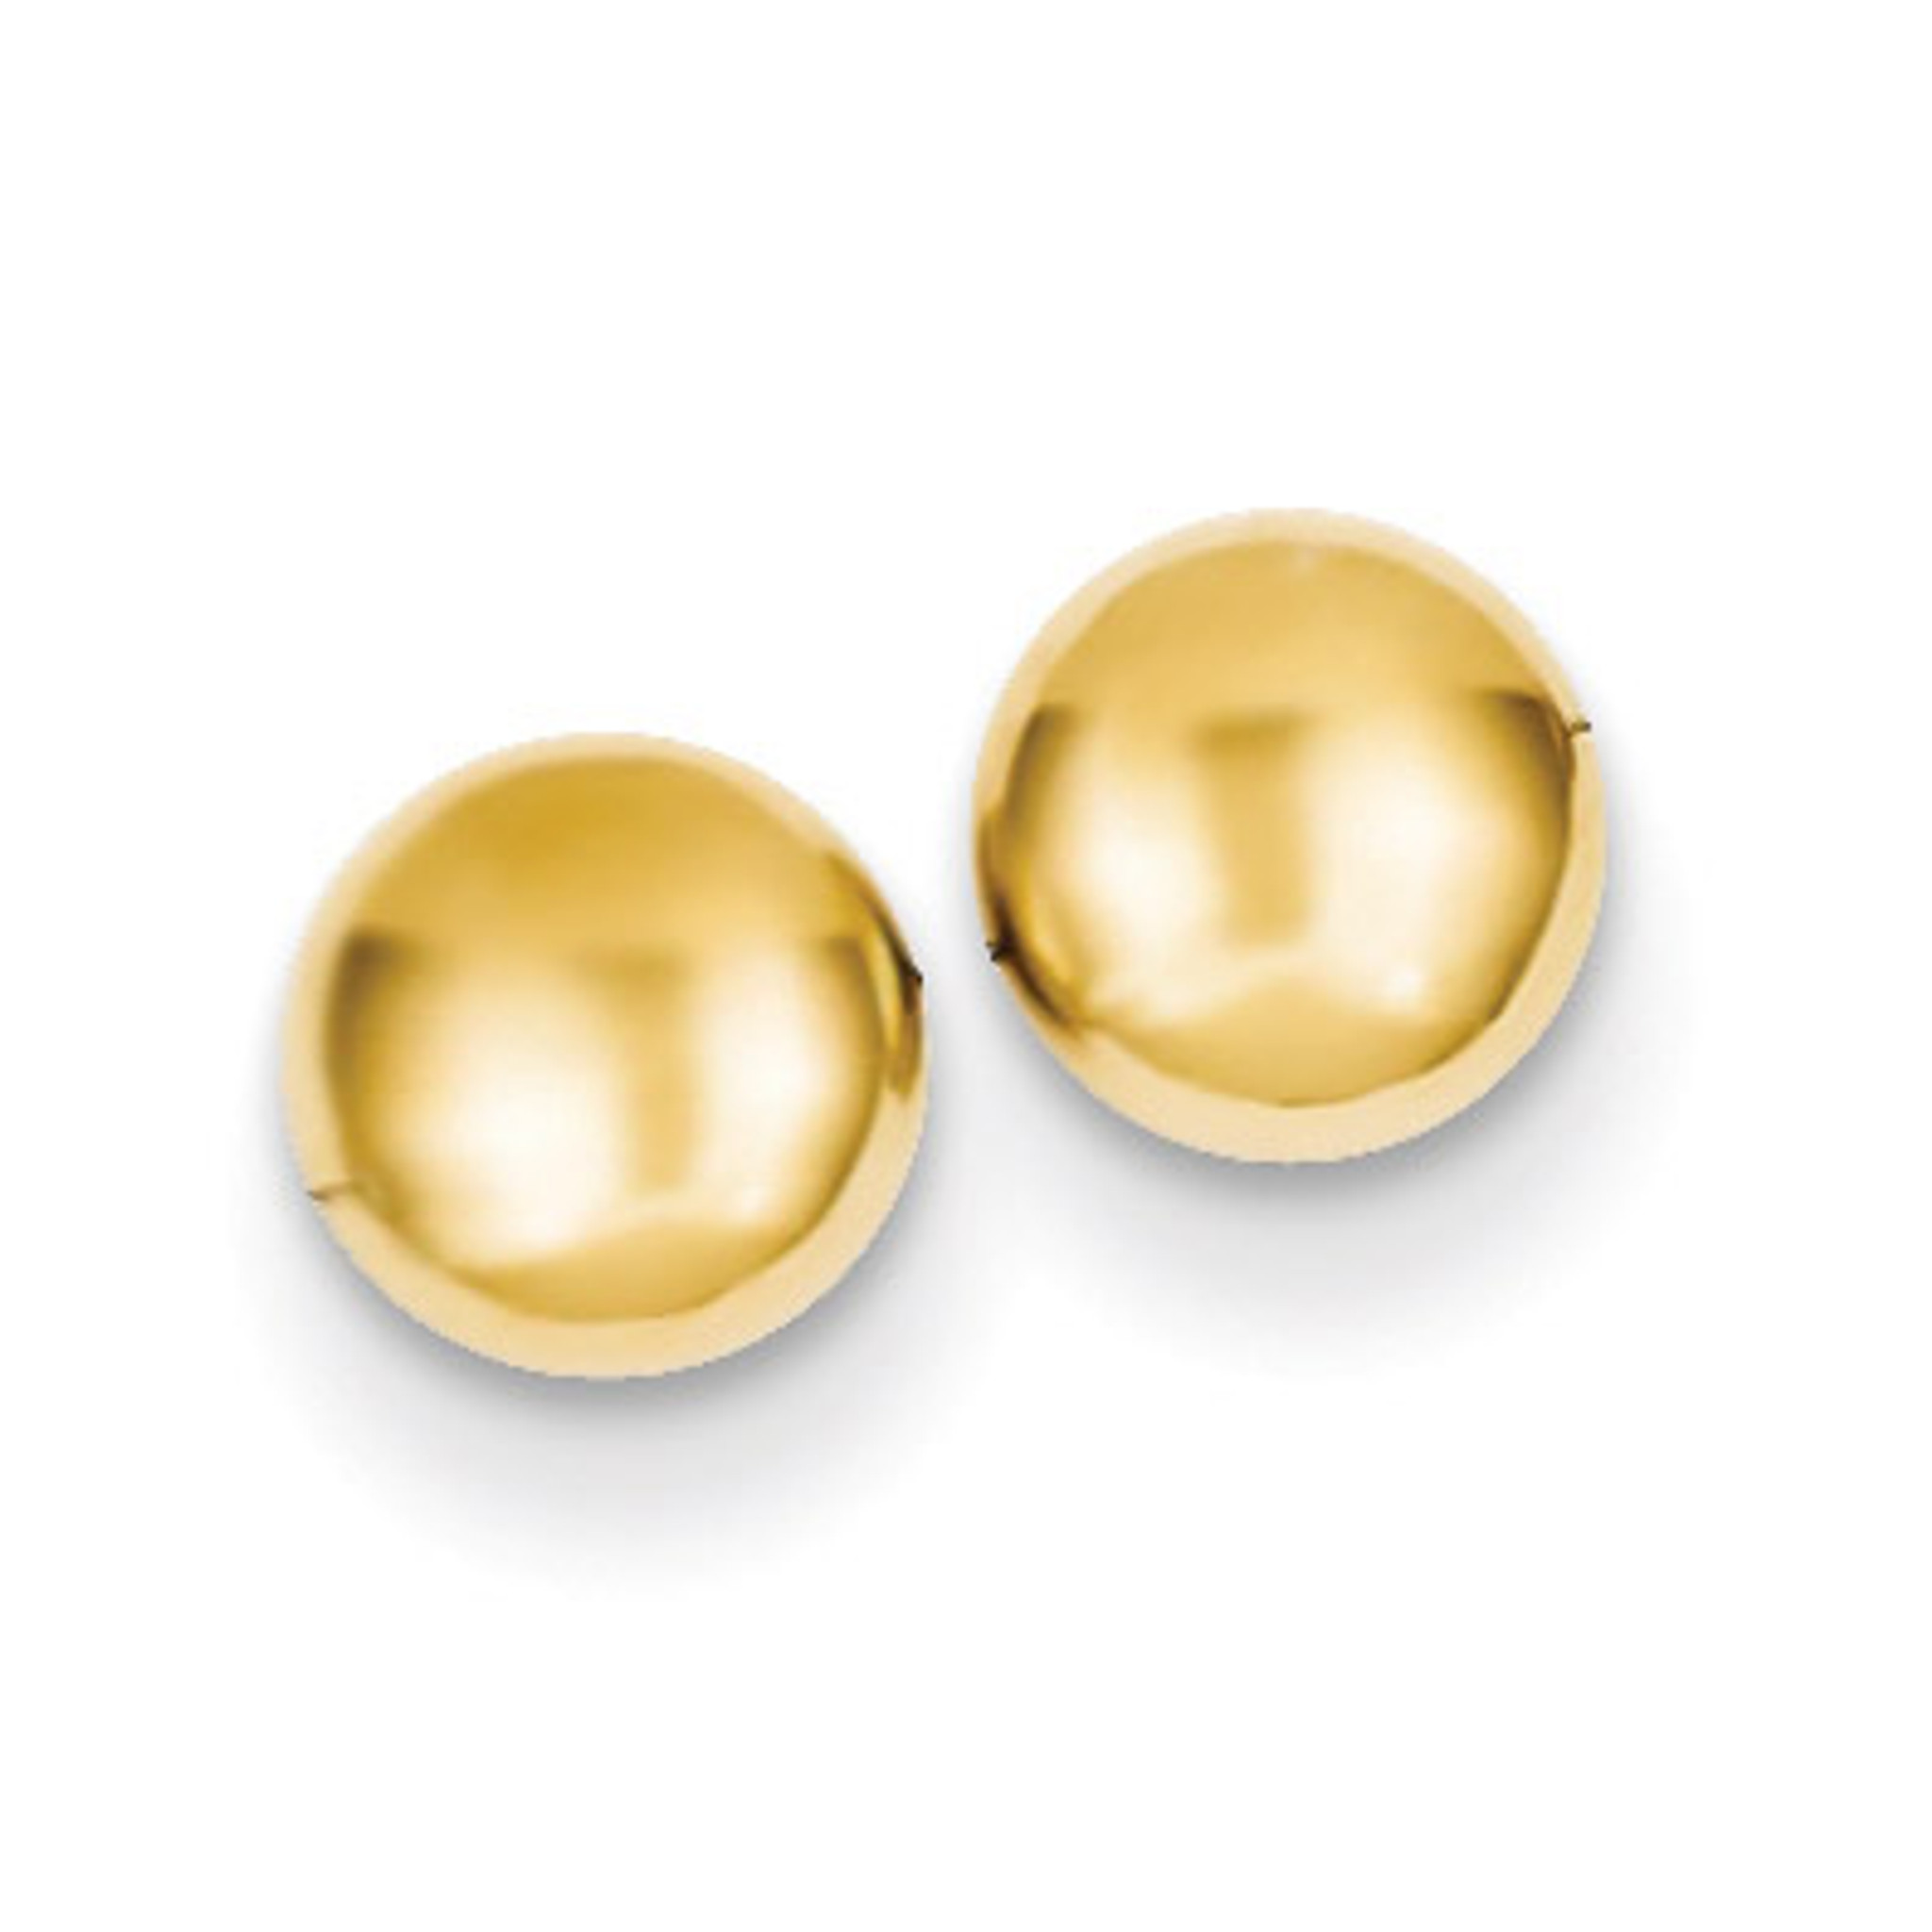 Details about   Real 14kt Yellow Gold Polished Half Ball Post Ear